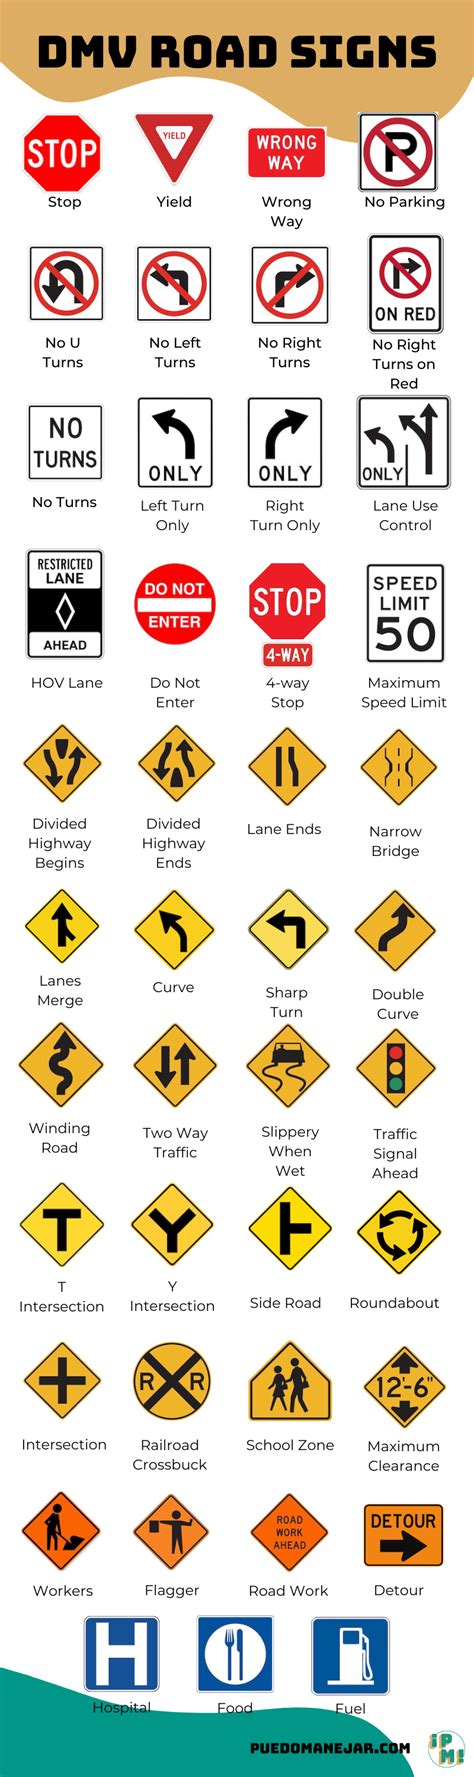 Dmv traffic signs practice test. As you age, it can be difficult to keep up with the ever-changing rules of the road. Fortunately, there are a few senior-friendly strategies you can use to prepare for the DMV prac... 